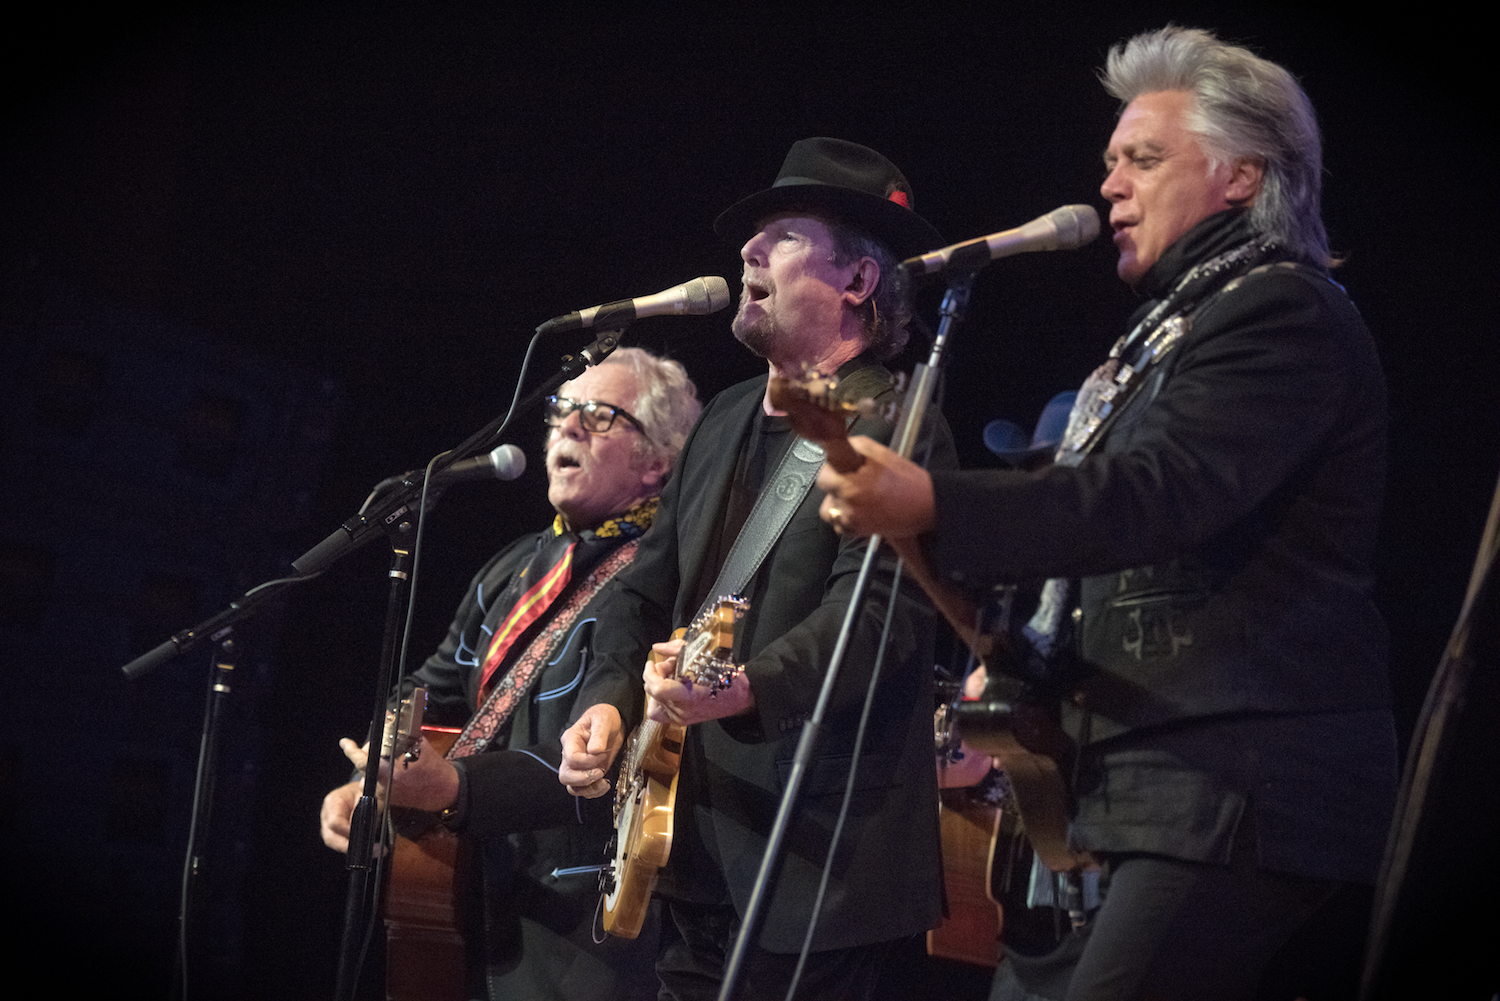 Live Review Roger McGuinn And Chris Hillman, "Sweetheart Of The Rodeo